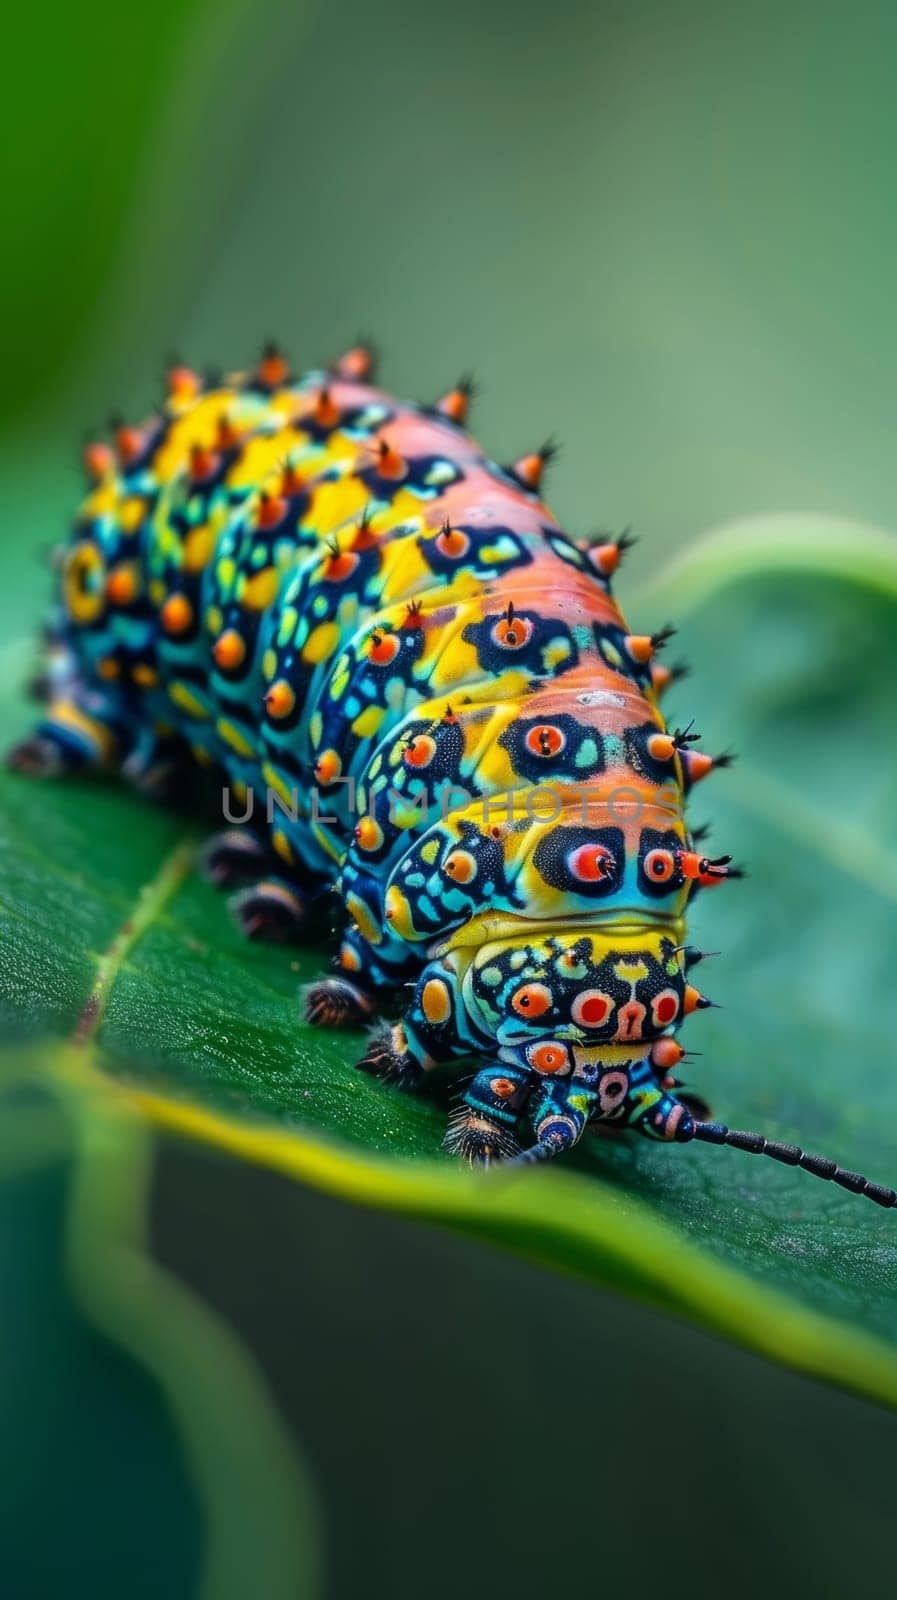 A multicolored spiky caterpillar perched on the edge of a leaf, captured in a natural macro environment